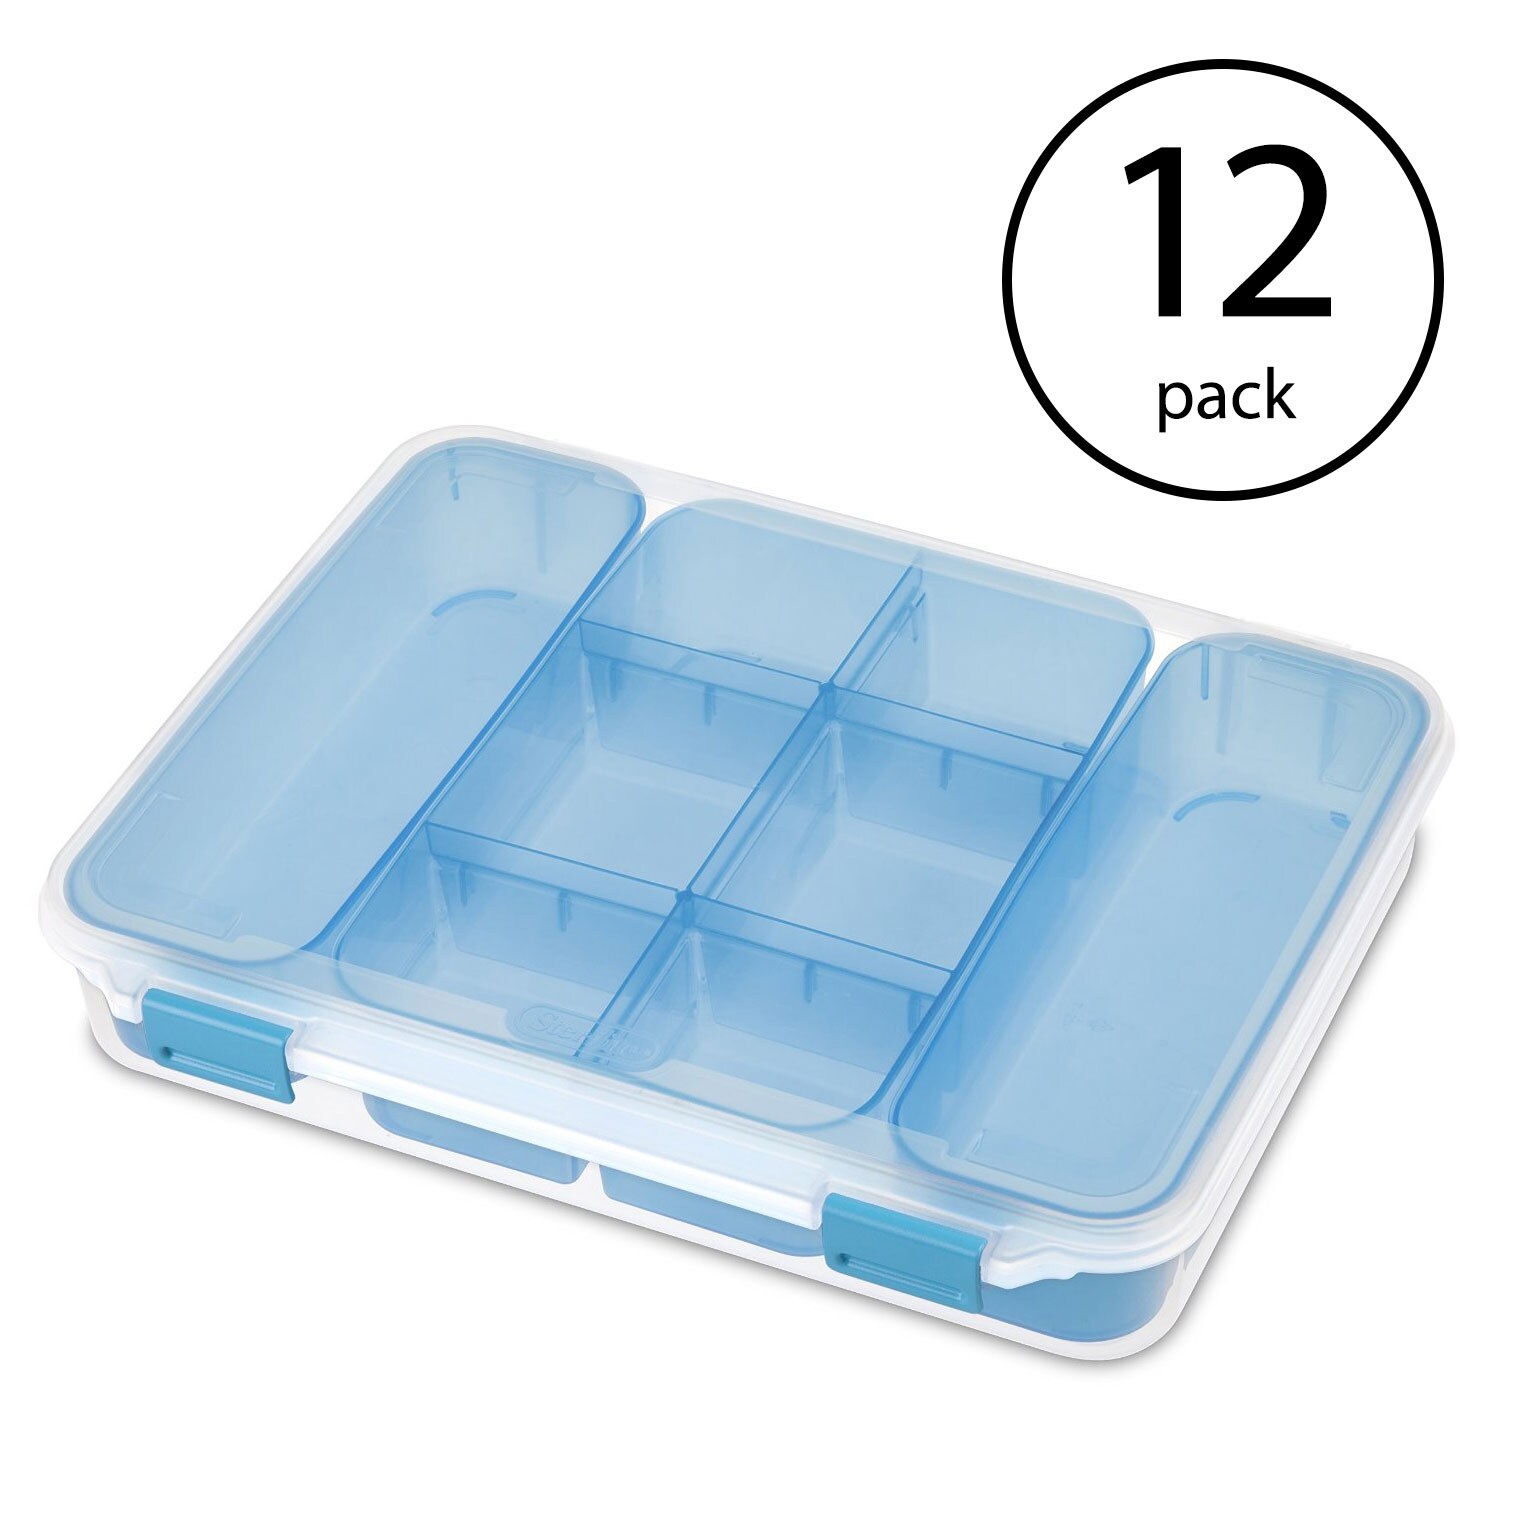 Sterilite 12 Gallon Stackable Plastic Storage Tote Container organizer Bin  with Latching Lid for Home and Garage Organization, Blue (12 Pack)